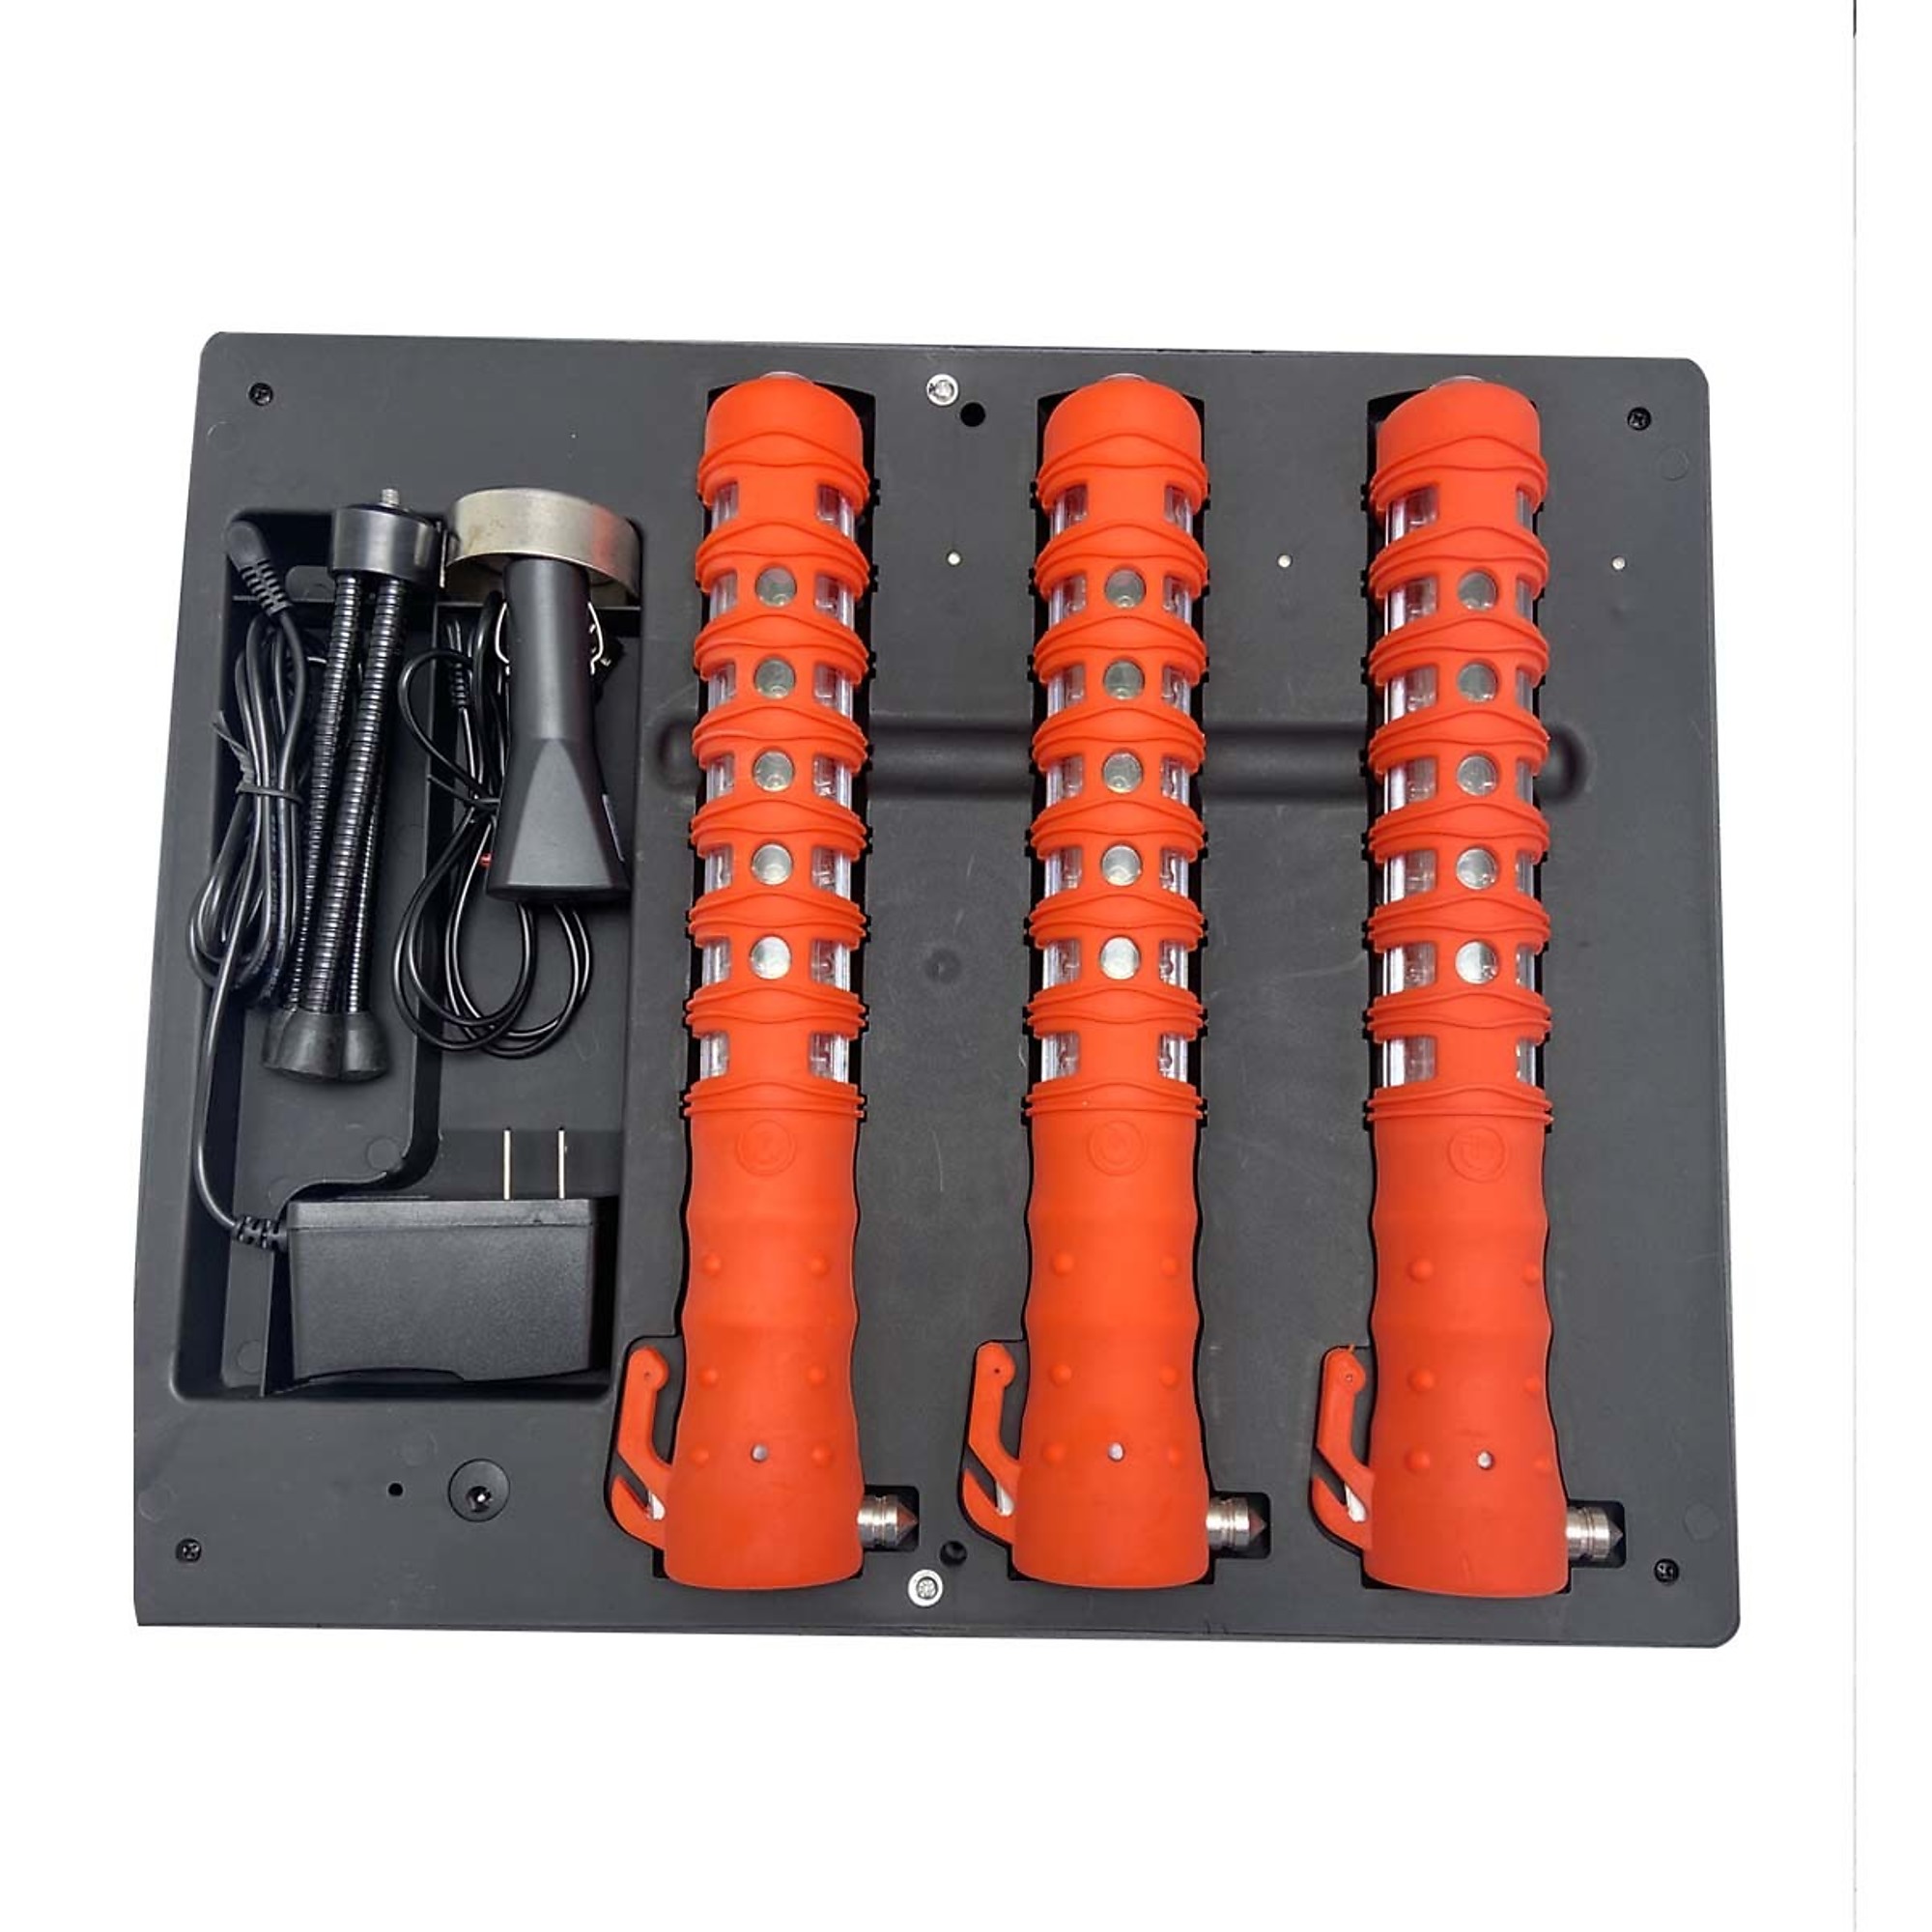 Race Sport Lighting Race Sport Lighting, Red 3-Baton LED Flare Charging Kit, Case Type Plastic Case, Pieces (qty.) 3, Model RS2088R2B-R